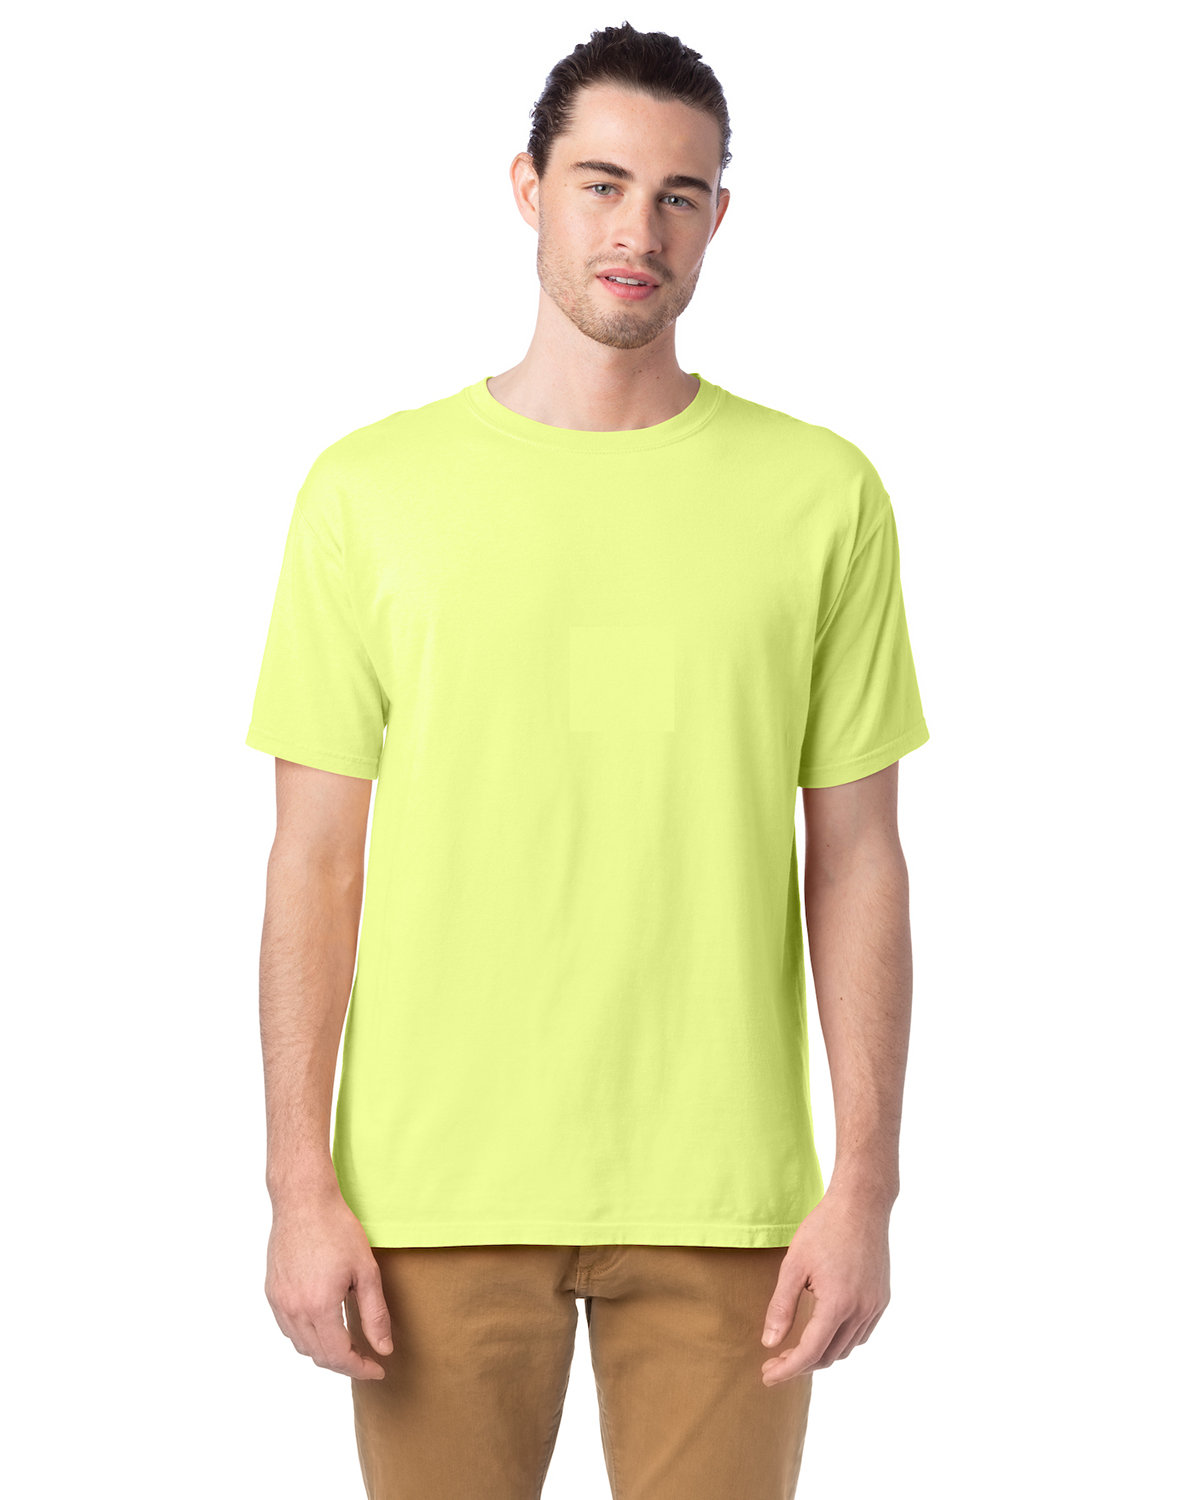 ComfortWash by Hanes Men's Garment-Dyed T-Shirt CHIC LIME 